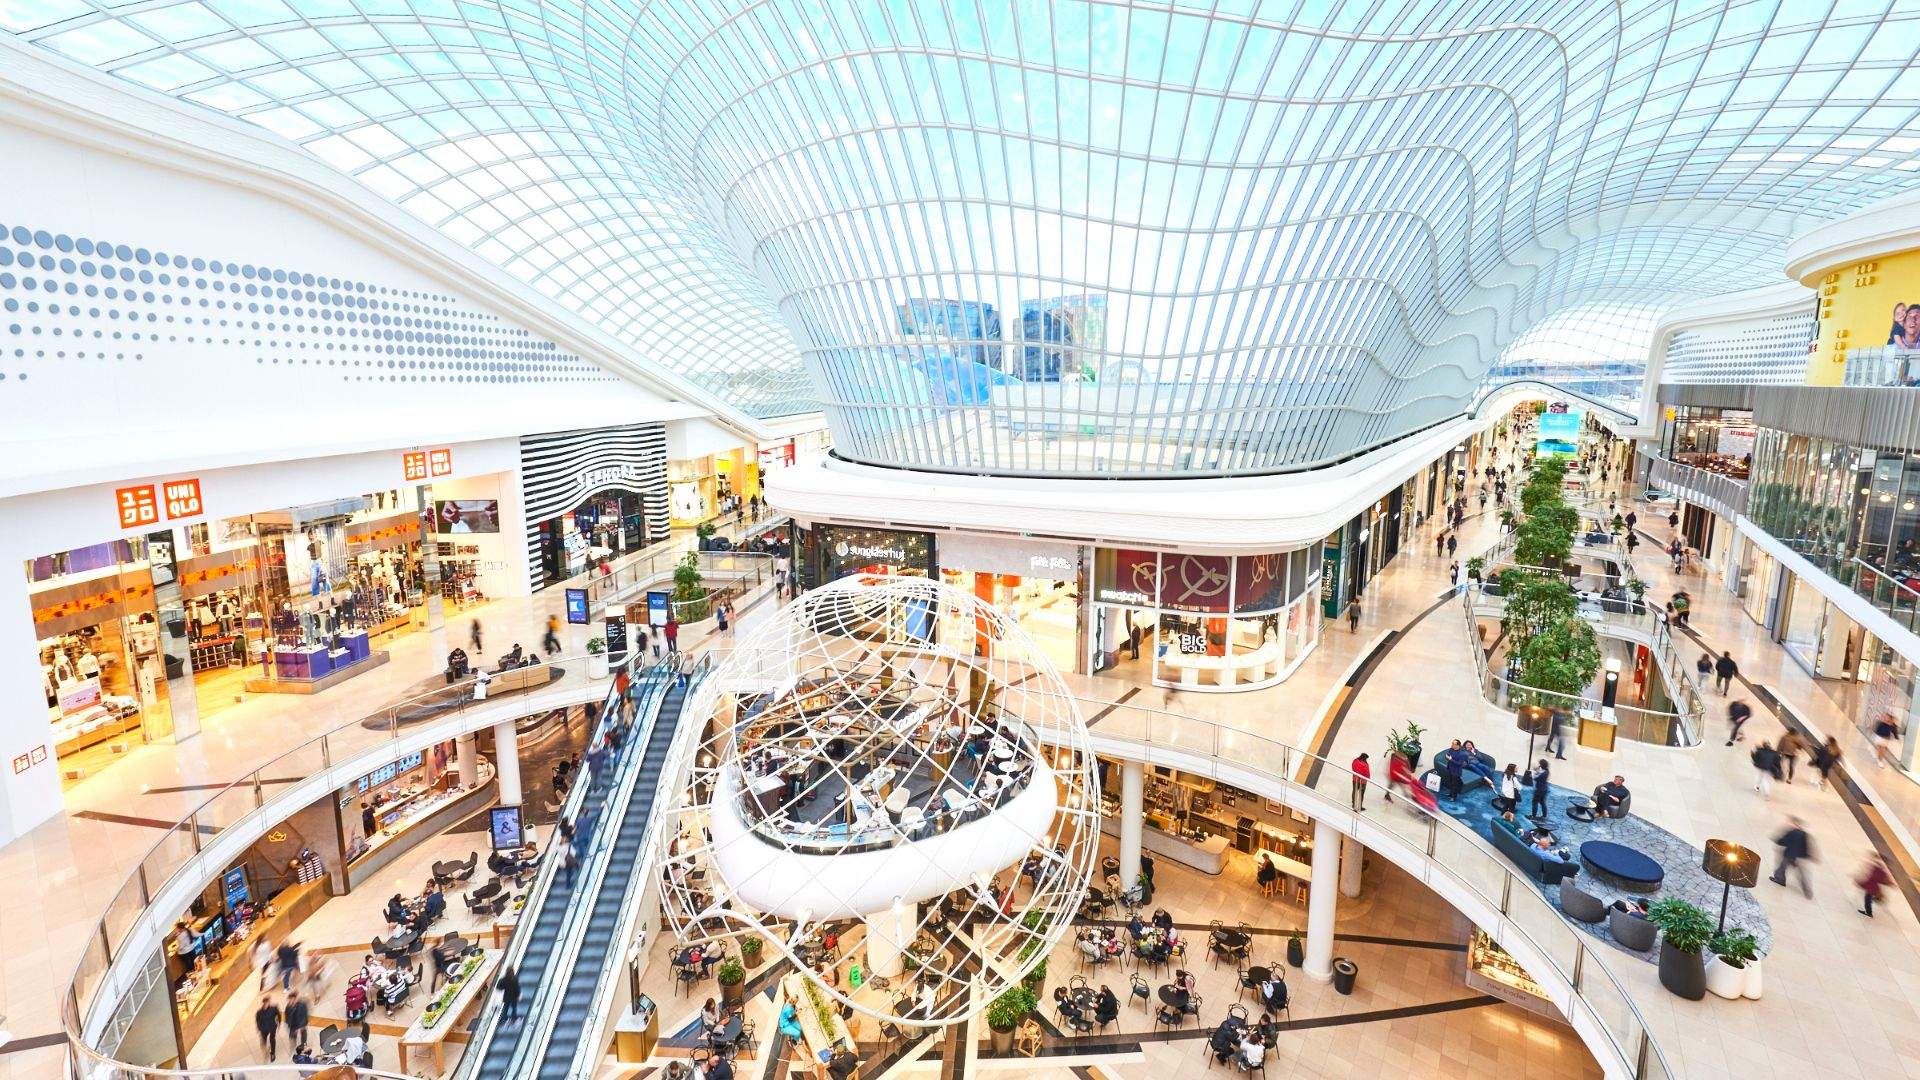 What's On at Chadstone – The Fashion Capital 2023